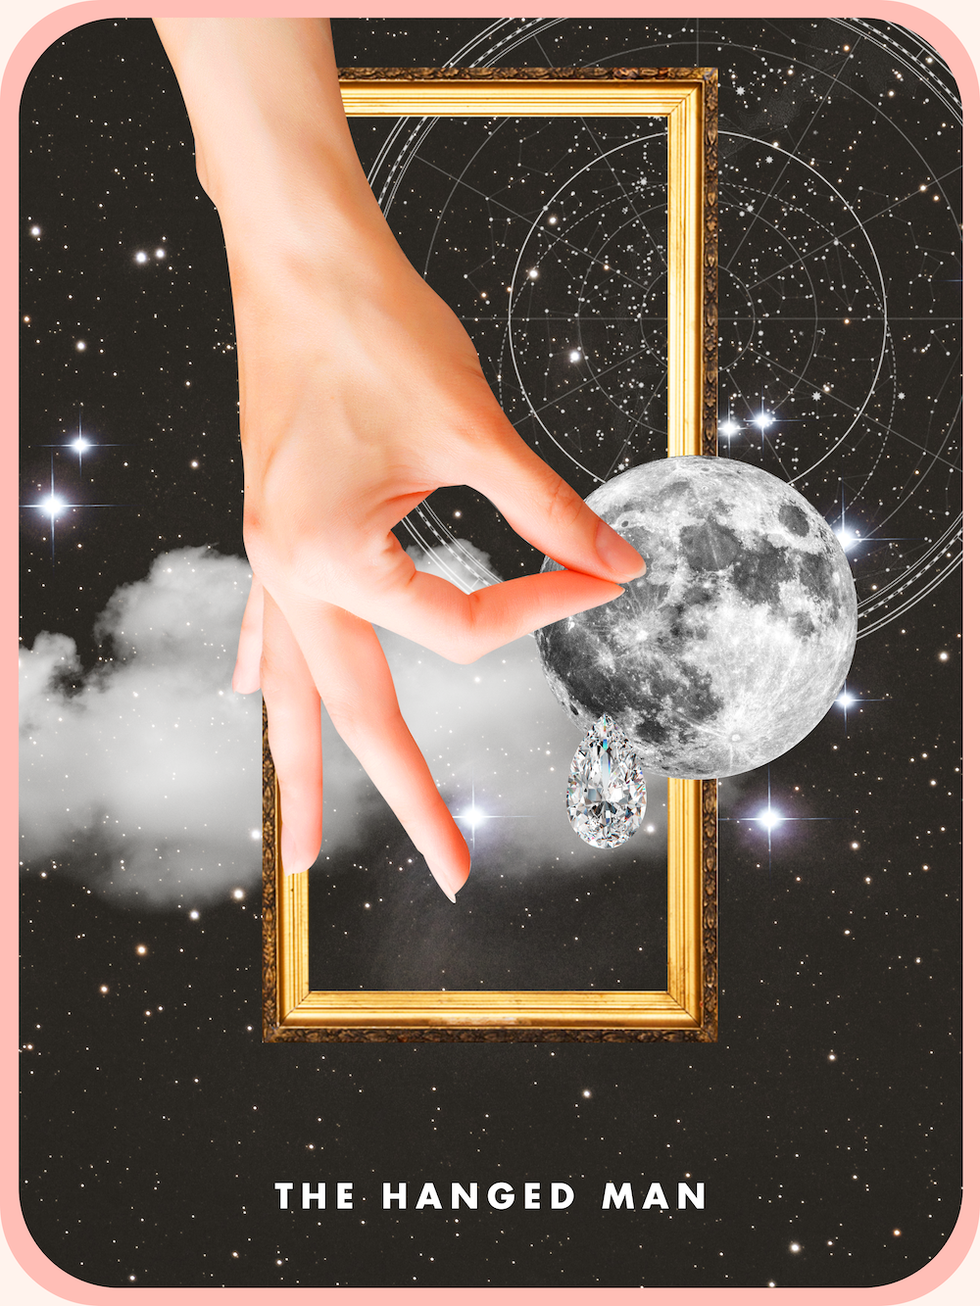 the tarot card the hanged man, showing a hand reaching down to hold onto a full moon inside a golden picture frame